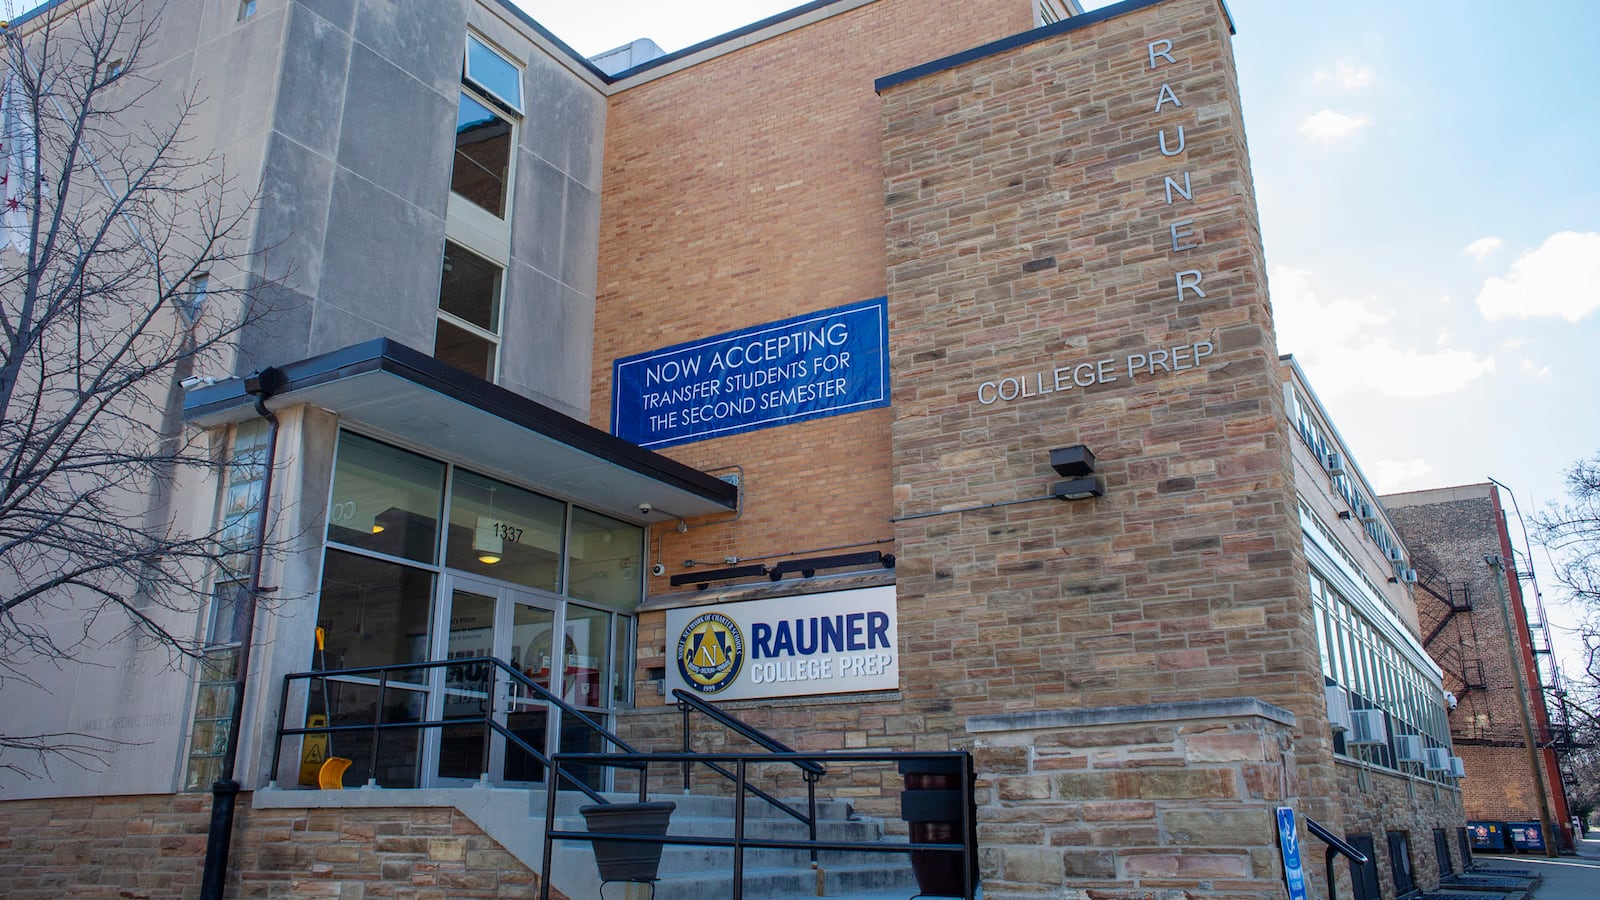 Exterior view of Noble Rauner College Prep in Chicago. Rauner College Prep is a public four-year charter high school located in the West Town neighborhood in Chicago. It is a part of the Noble Network of Charter Schools. Rauner College Prep is named in honor of Diana and Bruce Rauner. Photo by Stacey Rupolo/Chalkbeat; taken March, 2019